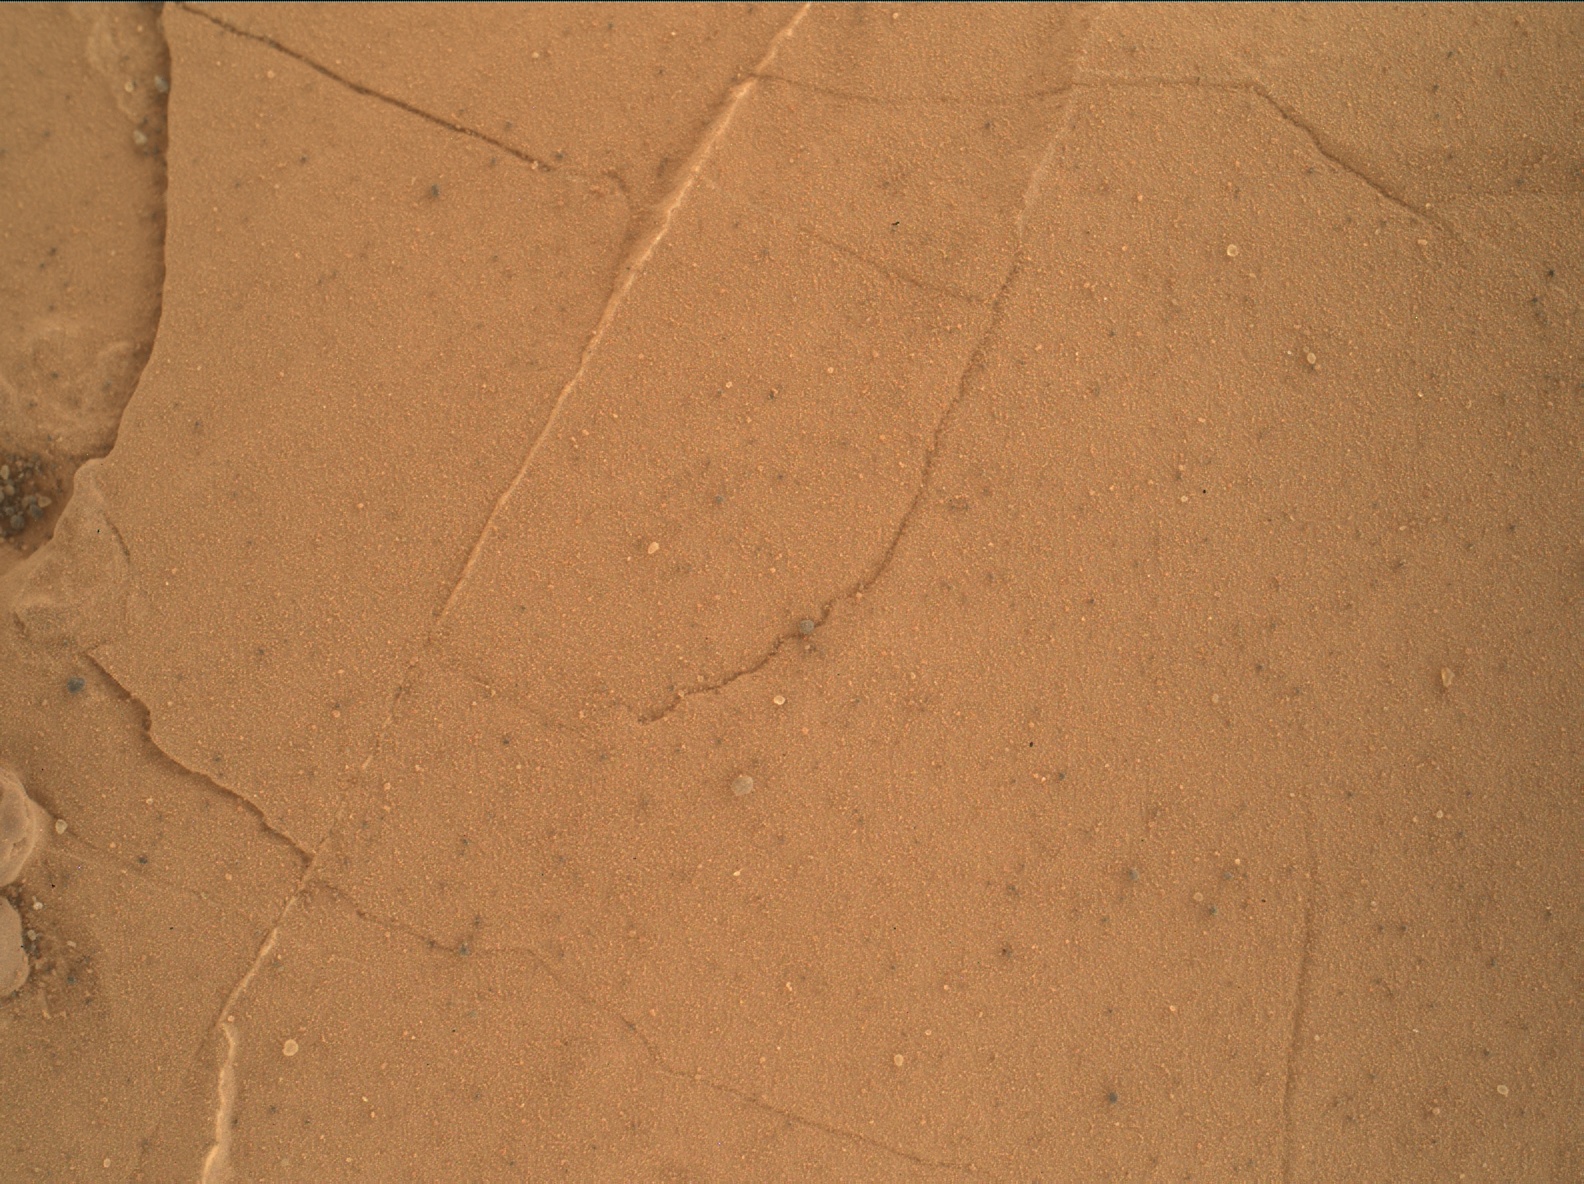 Nasa's Mars rover Curiosity acquired this image using its Mars Hand Lens Imager (MAHLI) on Sol 1795